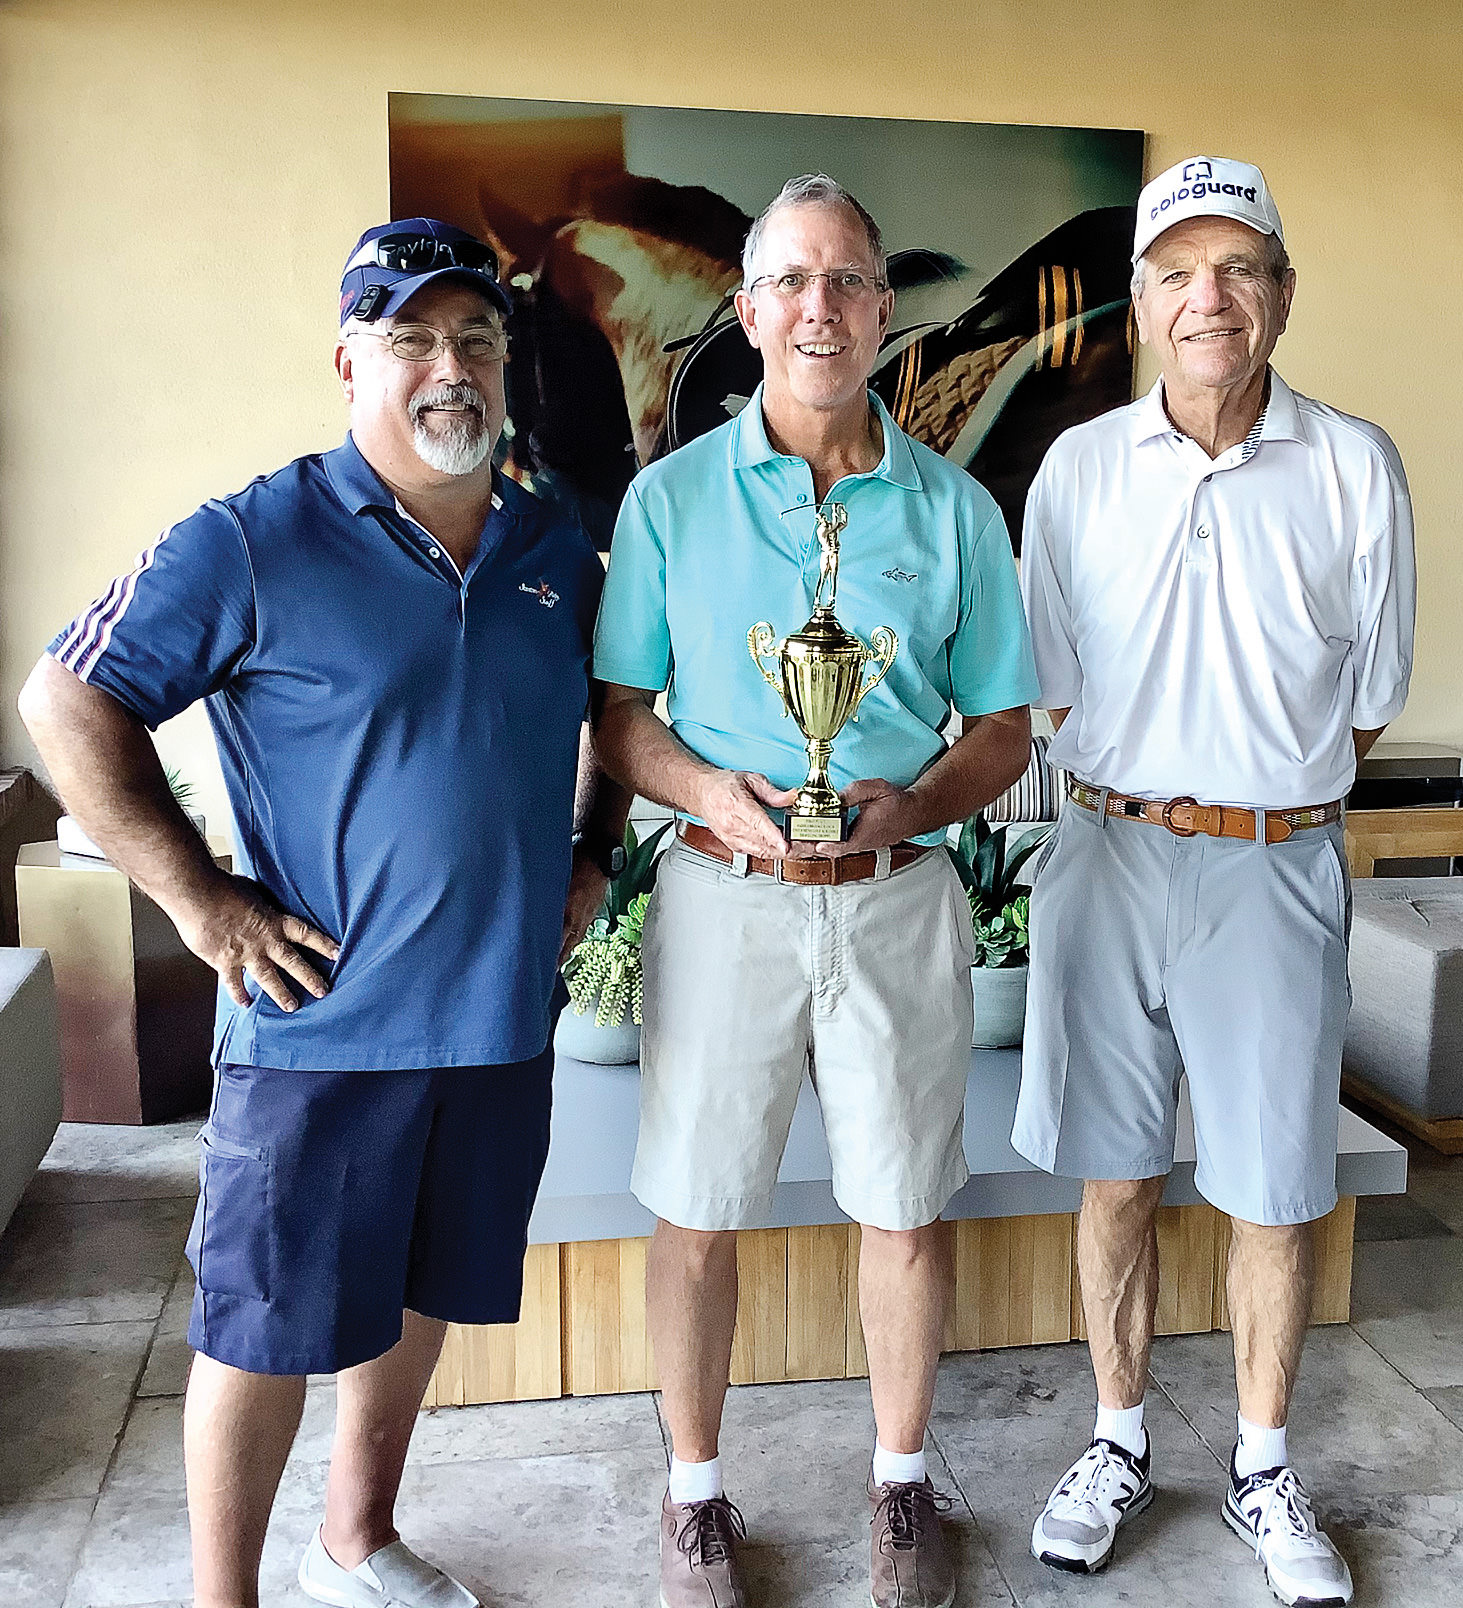 The winning team for the 2020 Unit 8A Rick Dahlin Memorial Tournament, at nine-under par, just one stroke better than the second place team, was: (left to right) Dave Blaess, Guy Shelton, and Brian Cowman.